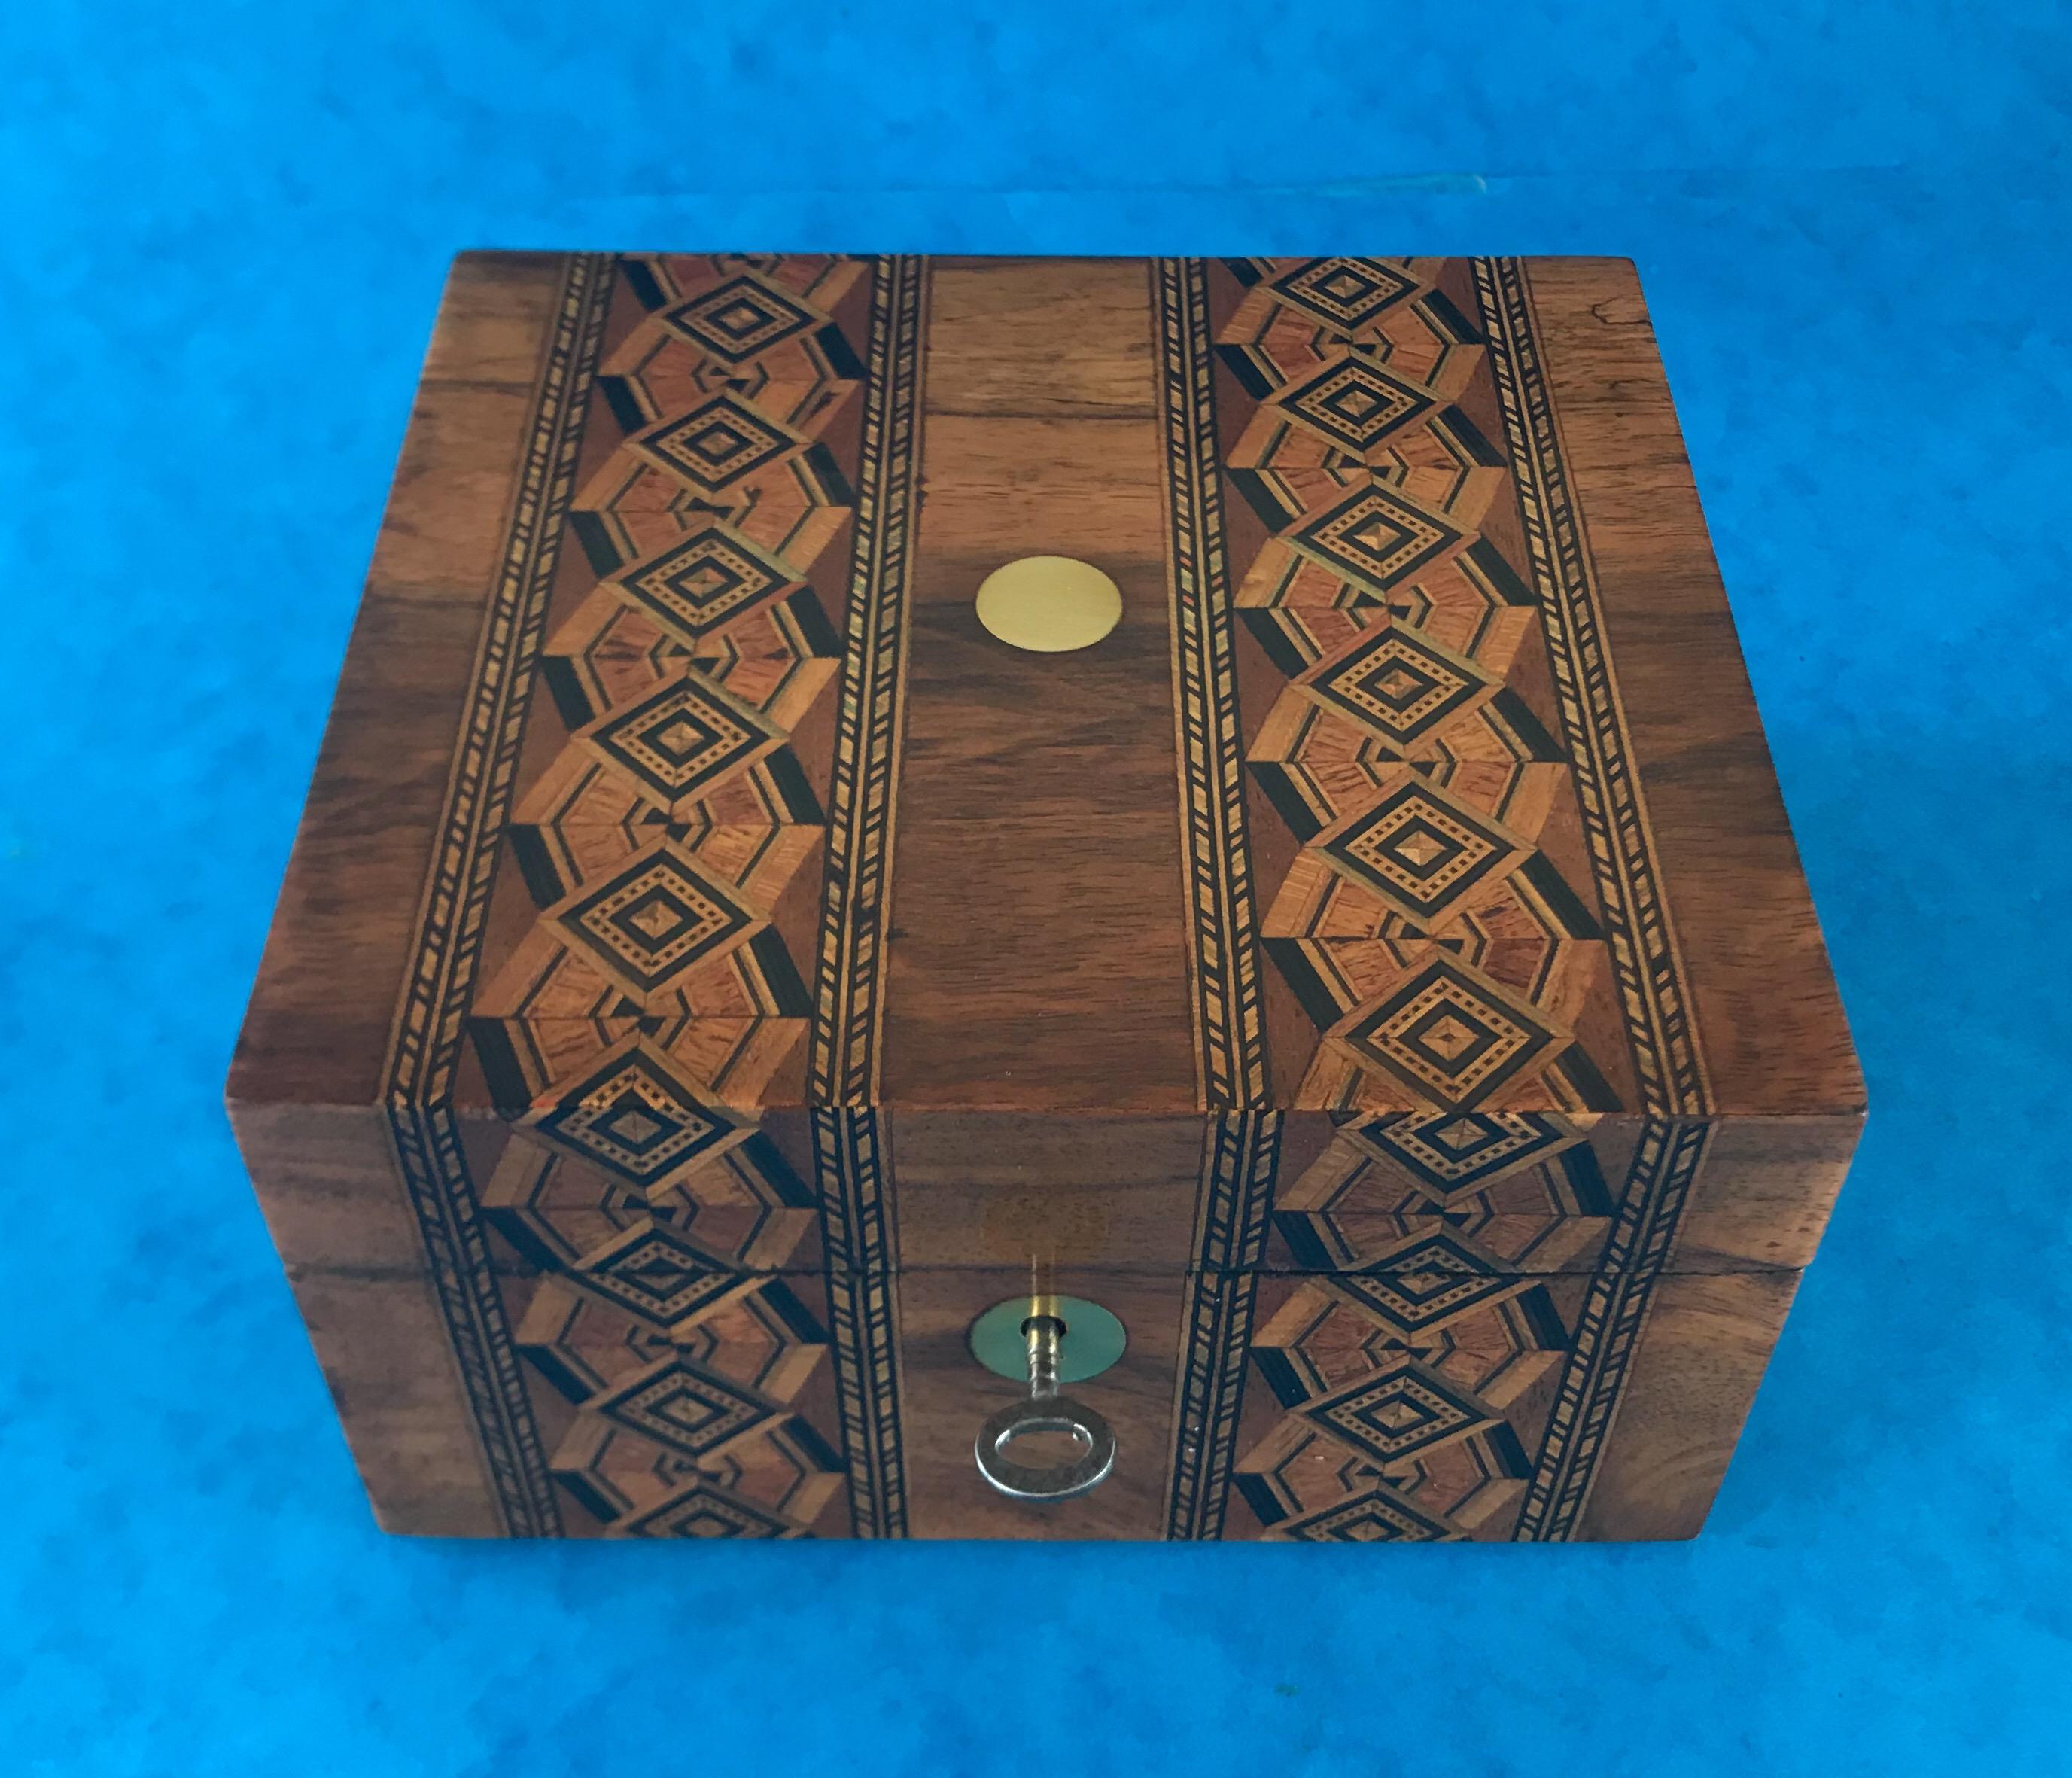 A Victorian 1890-1900 inlaid walnut tunbridge ware box, it has its original silk and paper interior and a working lock and key, it’s in beautiful condition and measures 17 by 16 and stands 9.5 cm high.
 